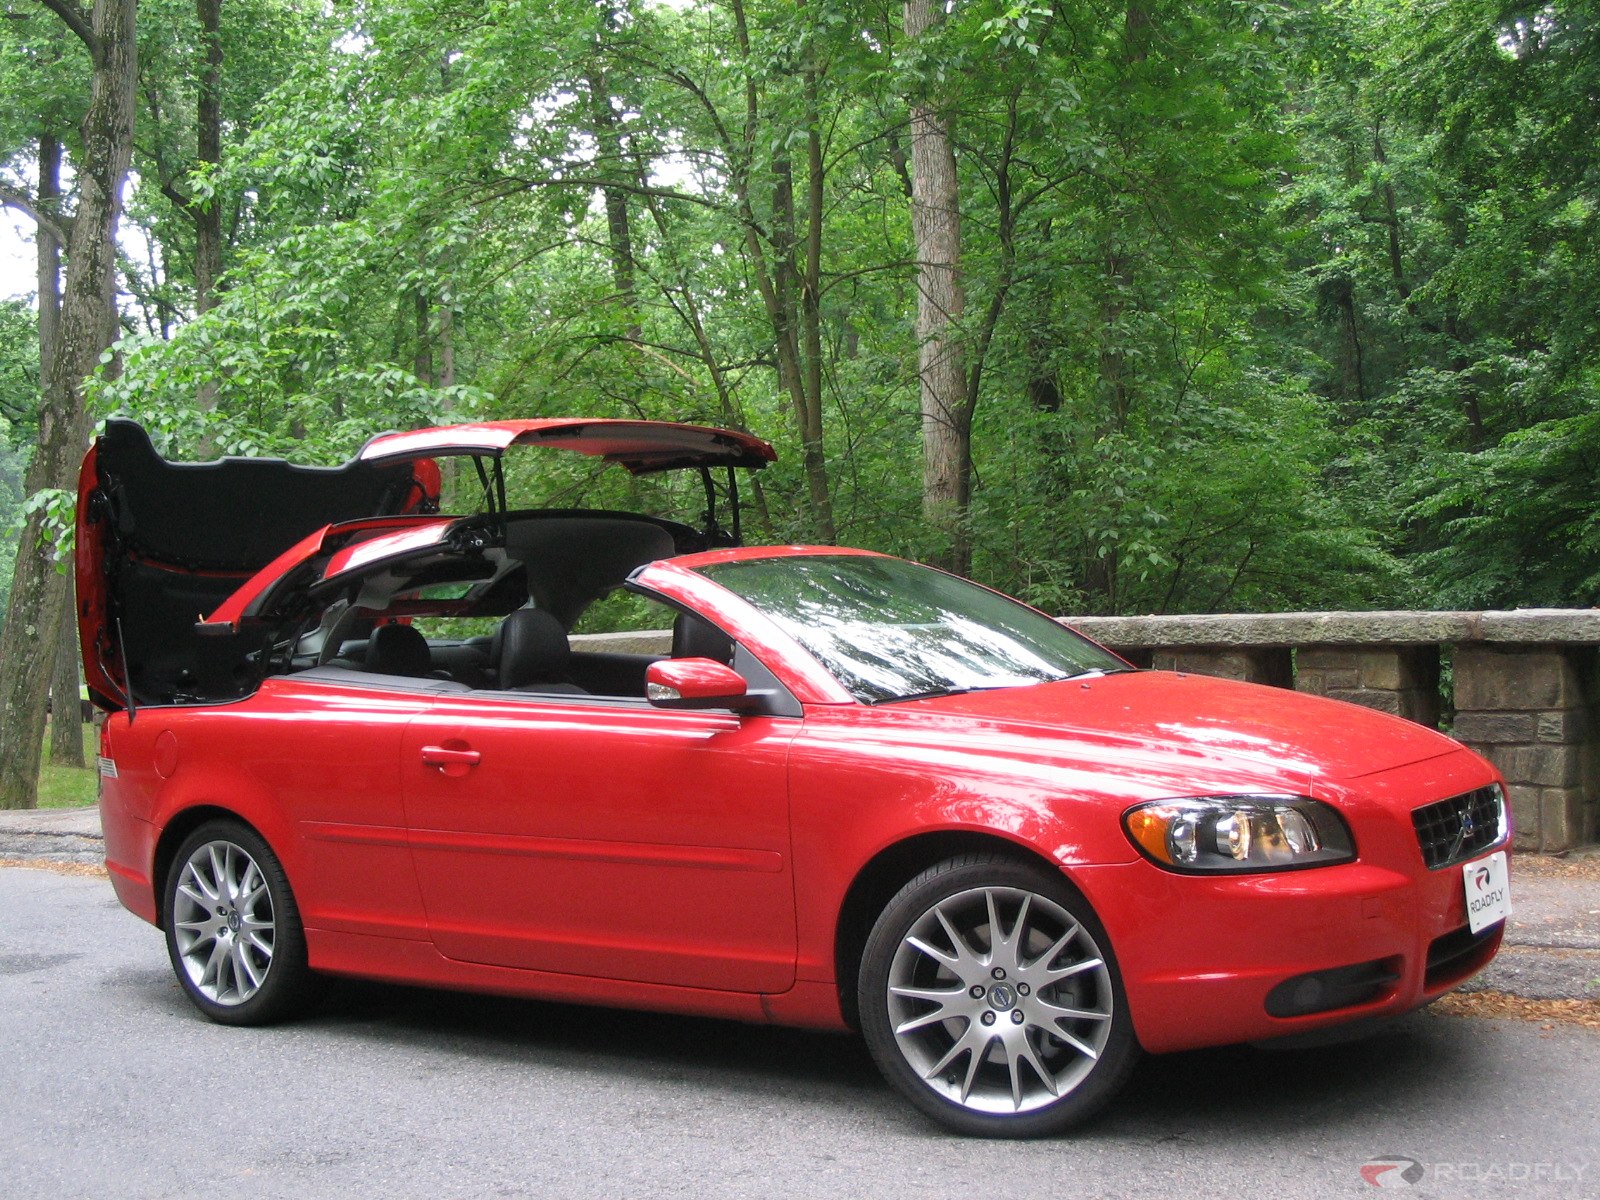 Volvo C70 T5 Convertible. View Download Wallpaper. 1600x1200. Comments